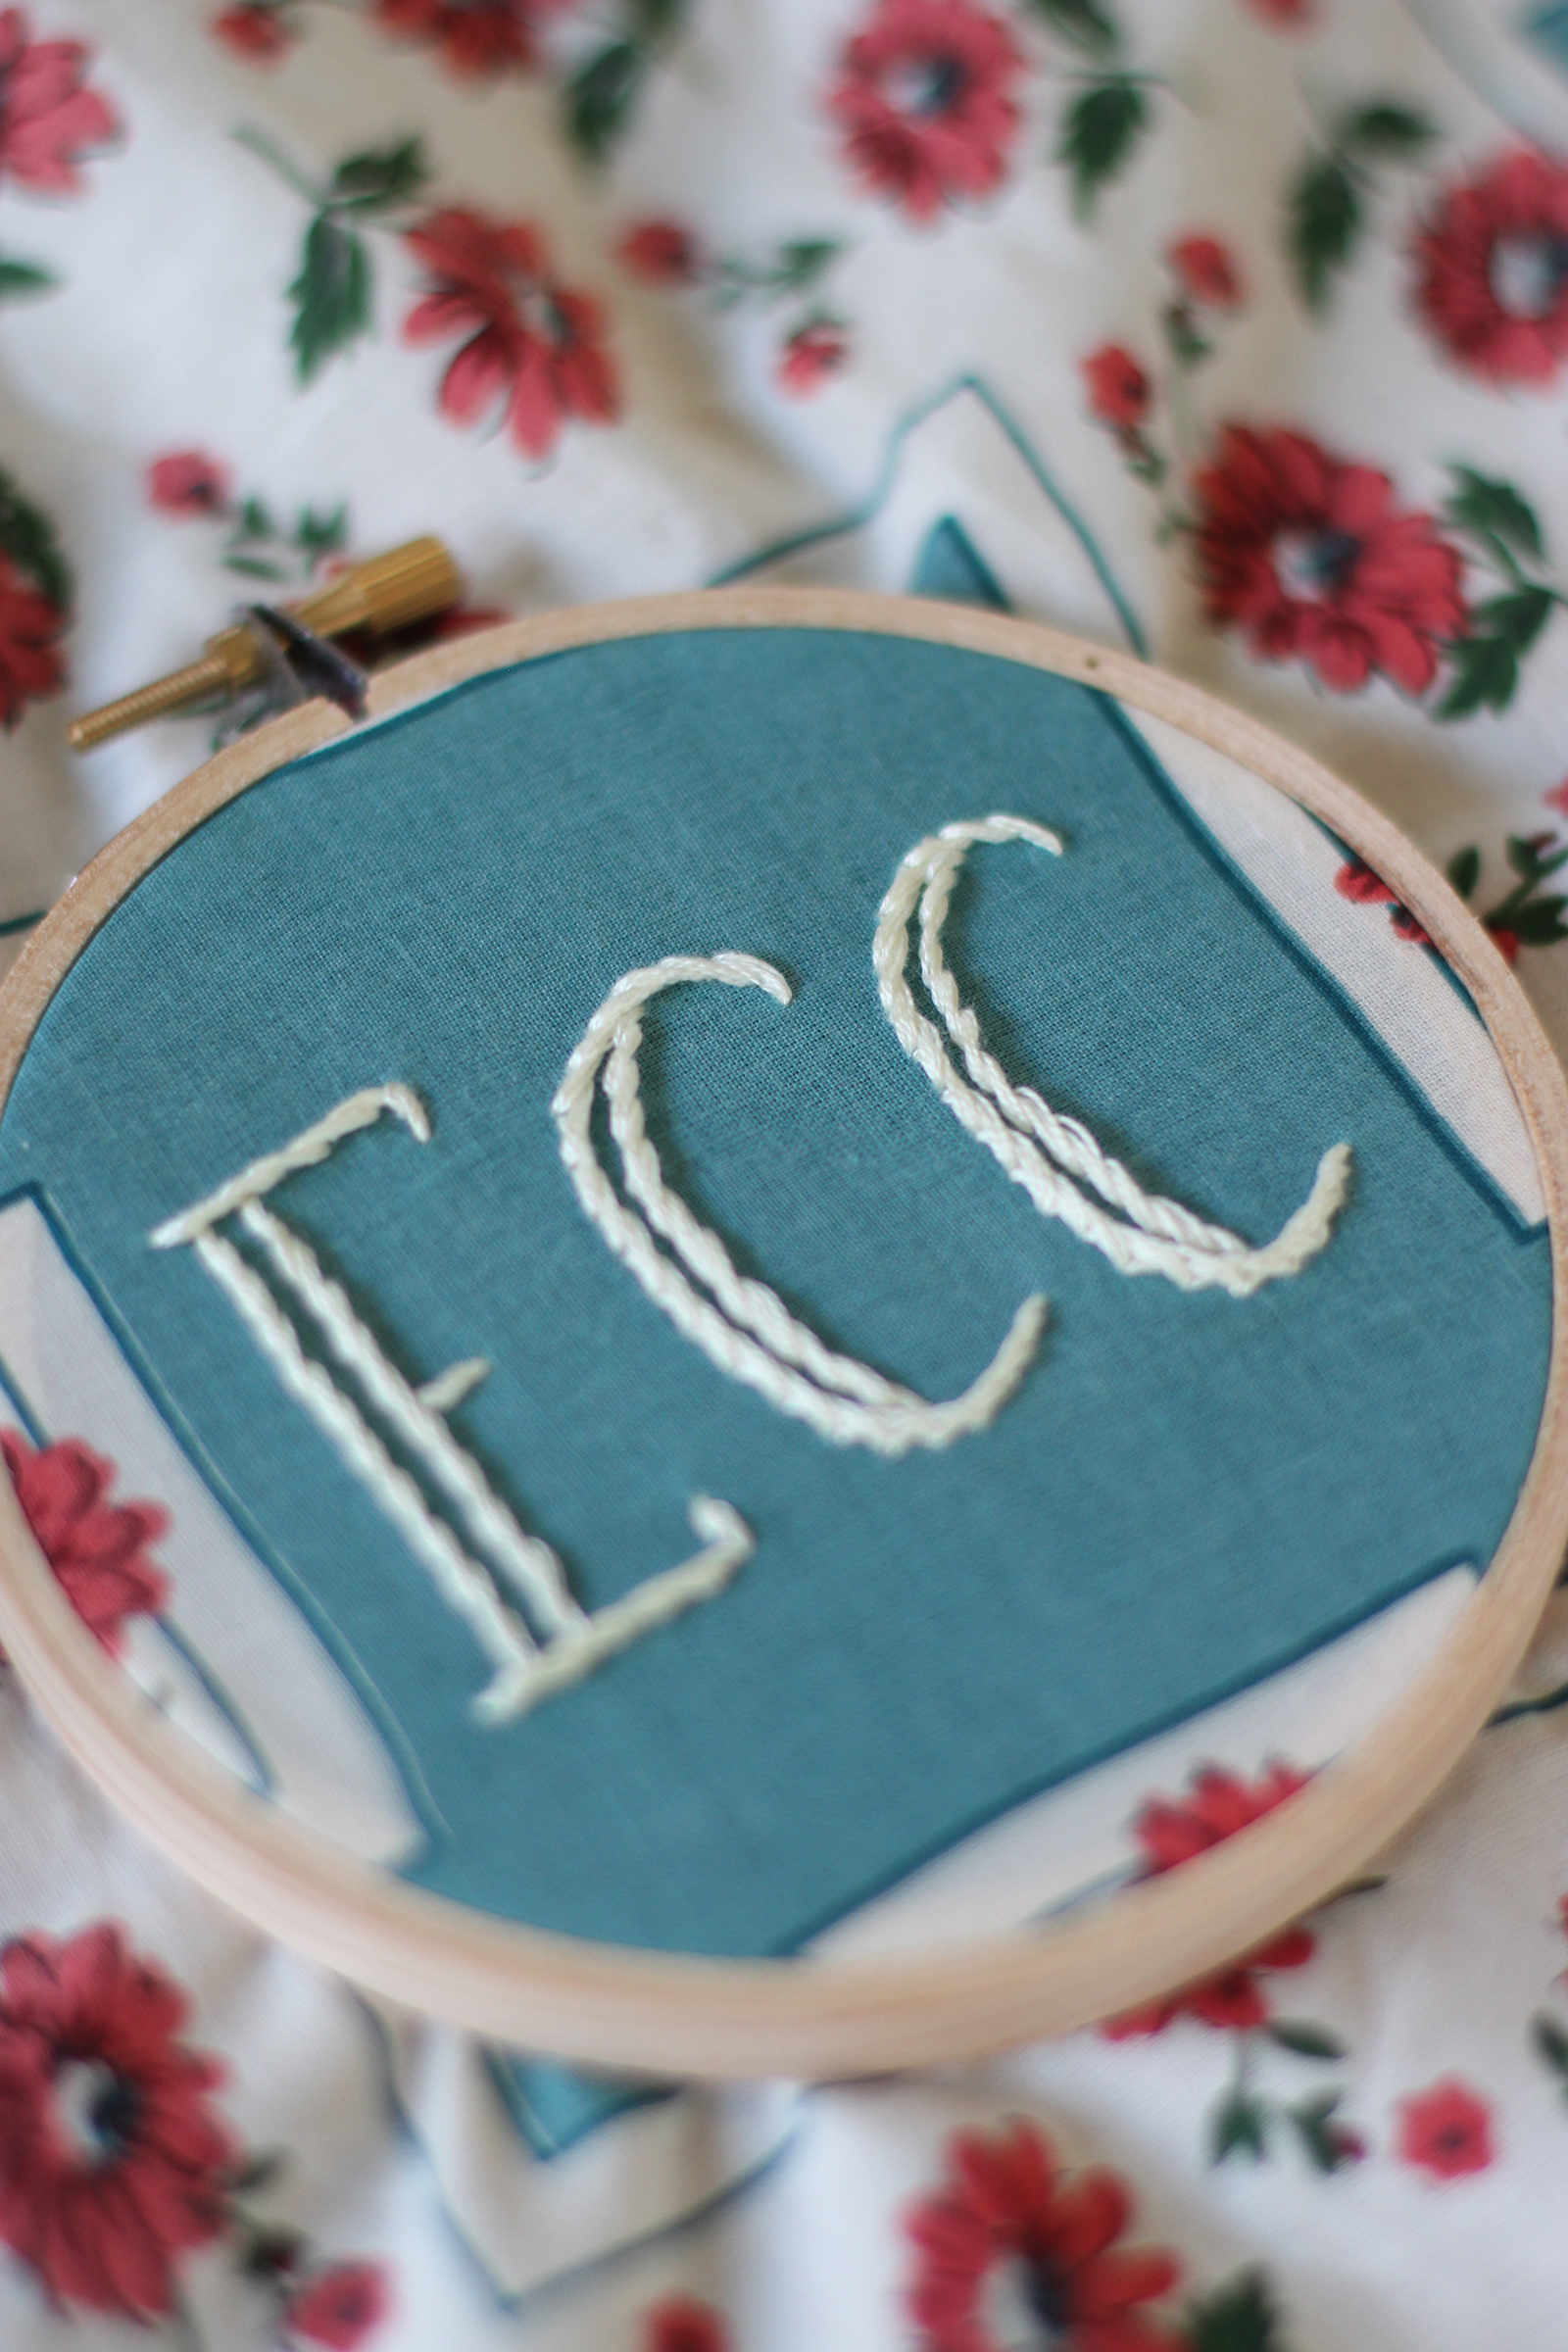 Embroidered initials